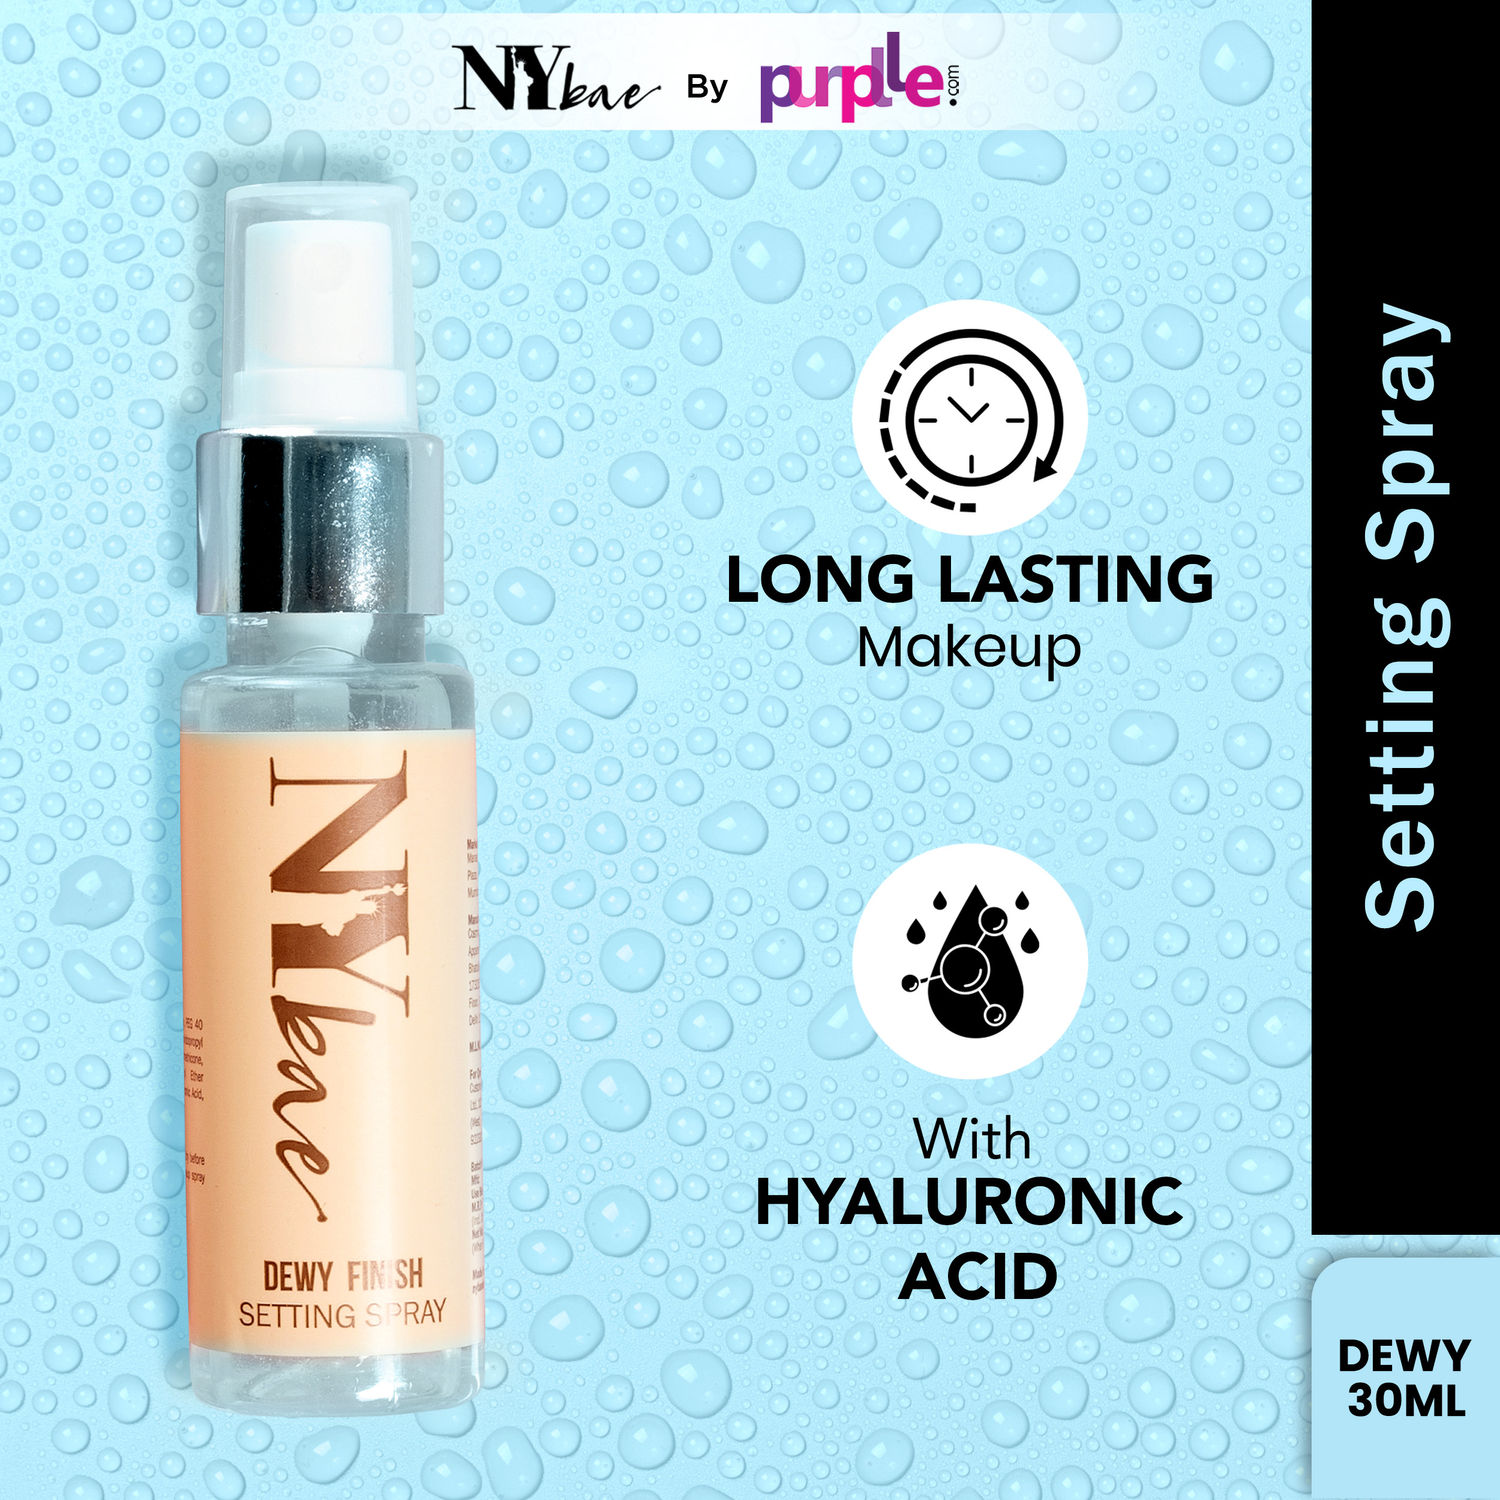 NY Bae Dewy Setting Spray | Makeup Fixer | Long Lasting Makeup | Hydrating | With Hyaluronic Acid | For Normal to Dry Skin | 30 ml